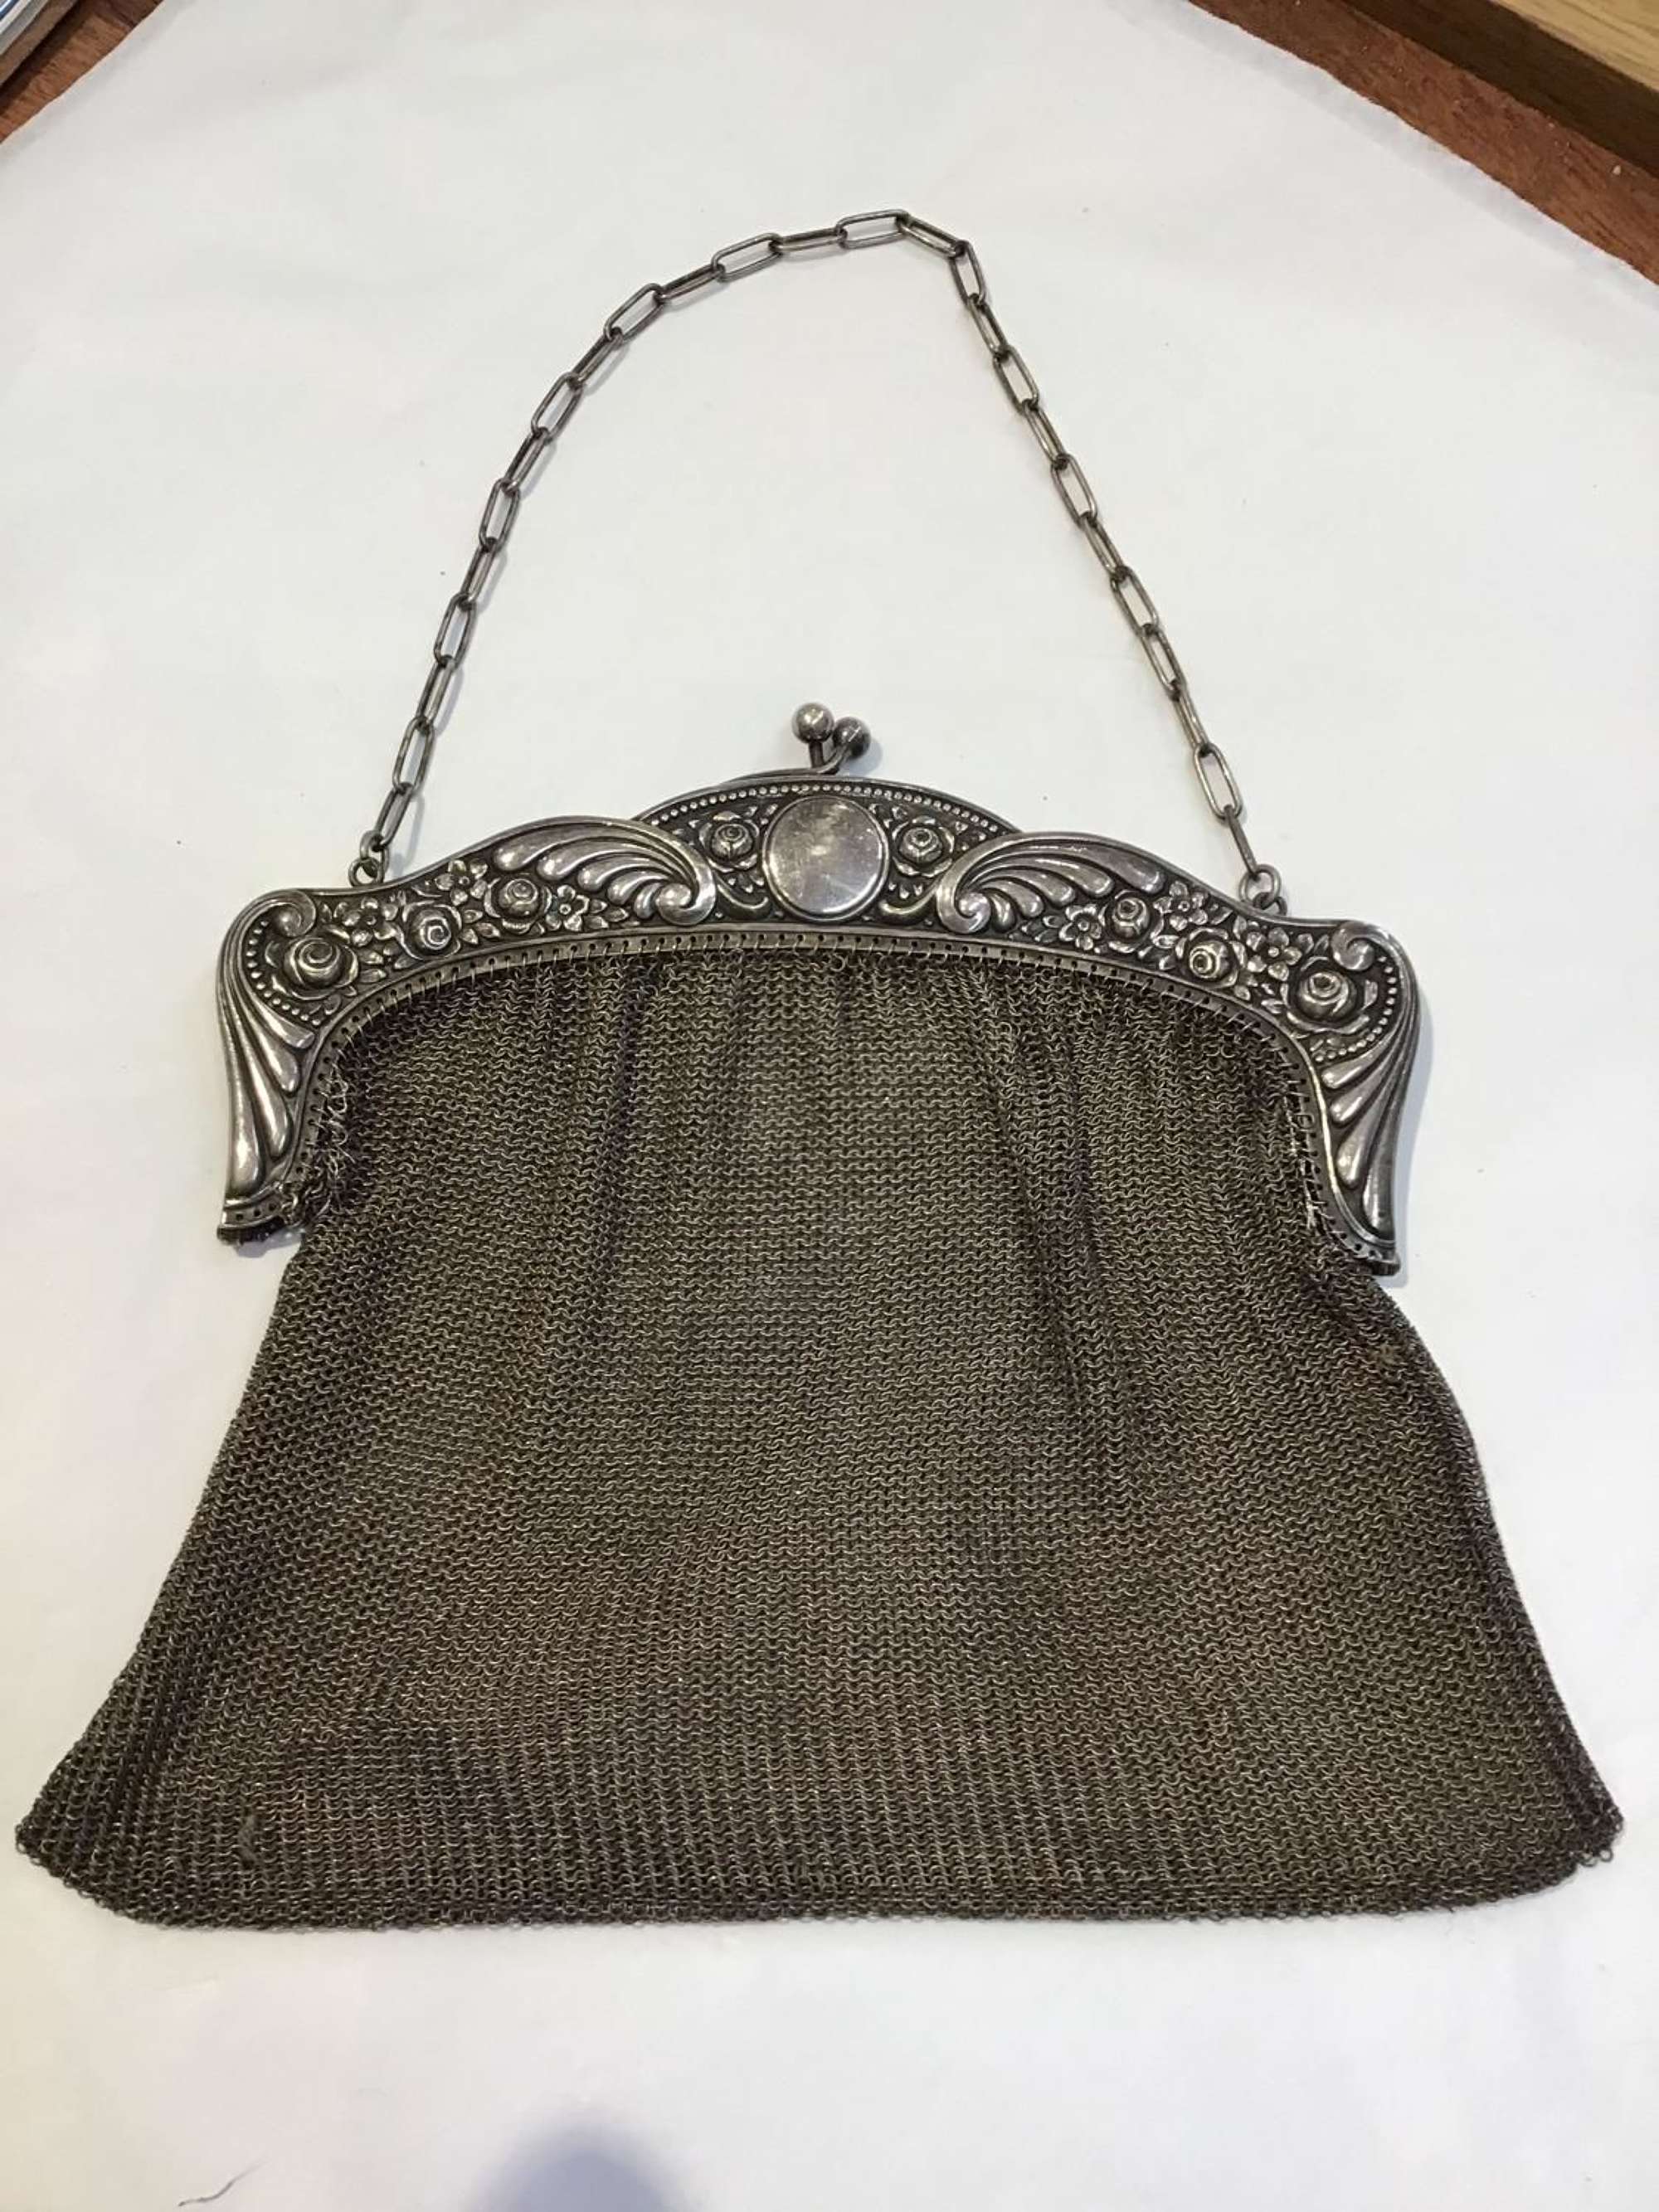 Edwardian silver plated chain bag